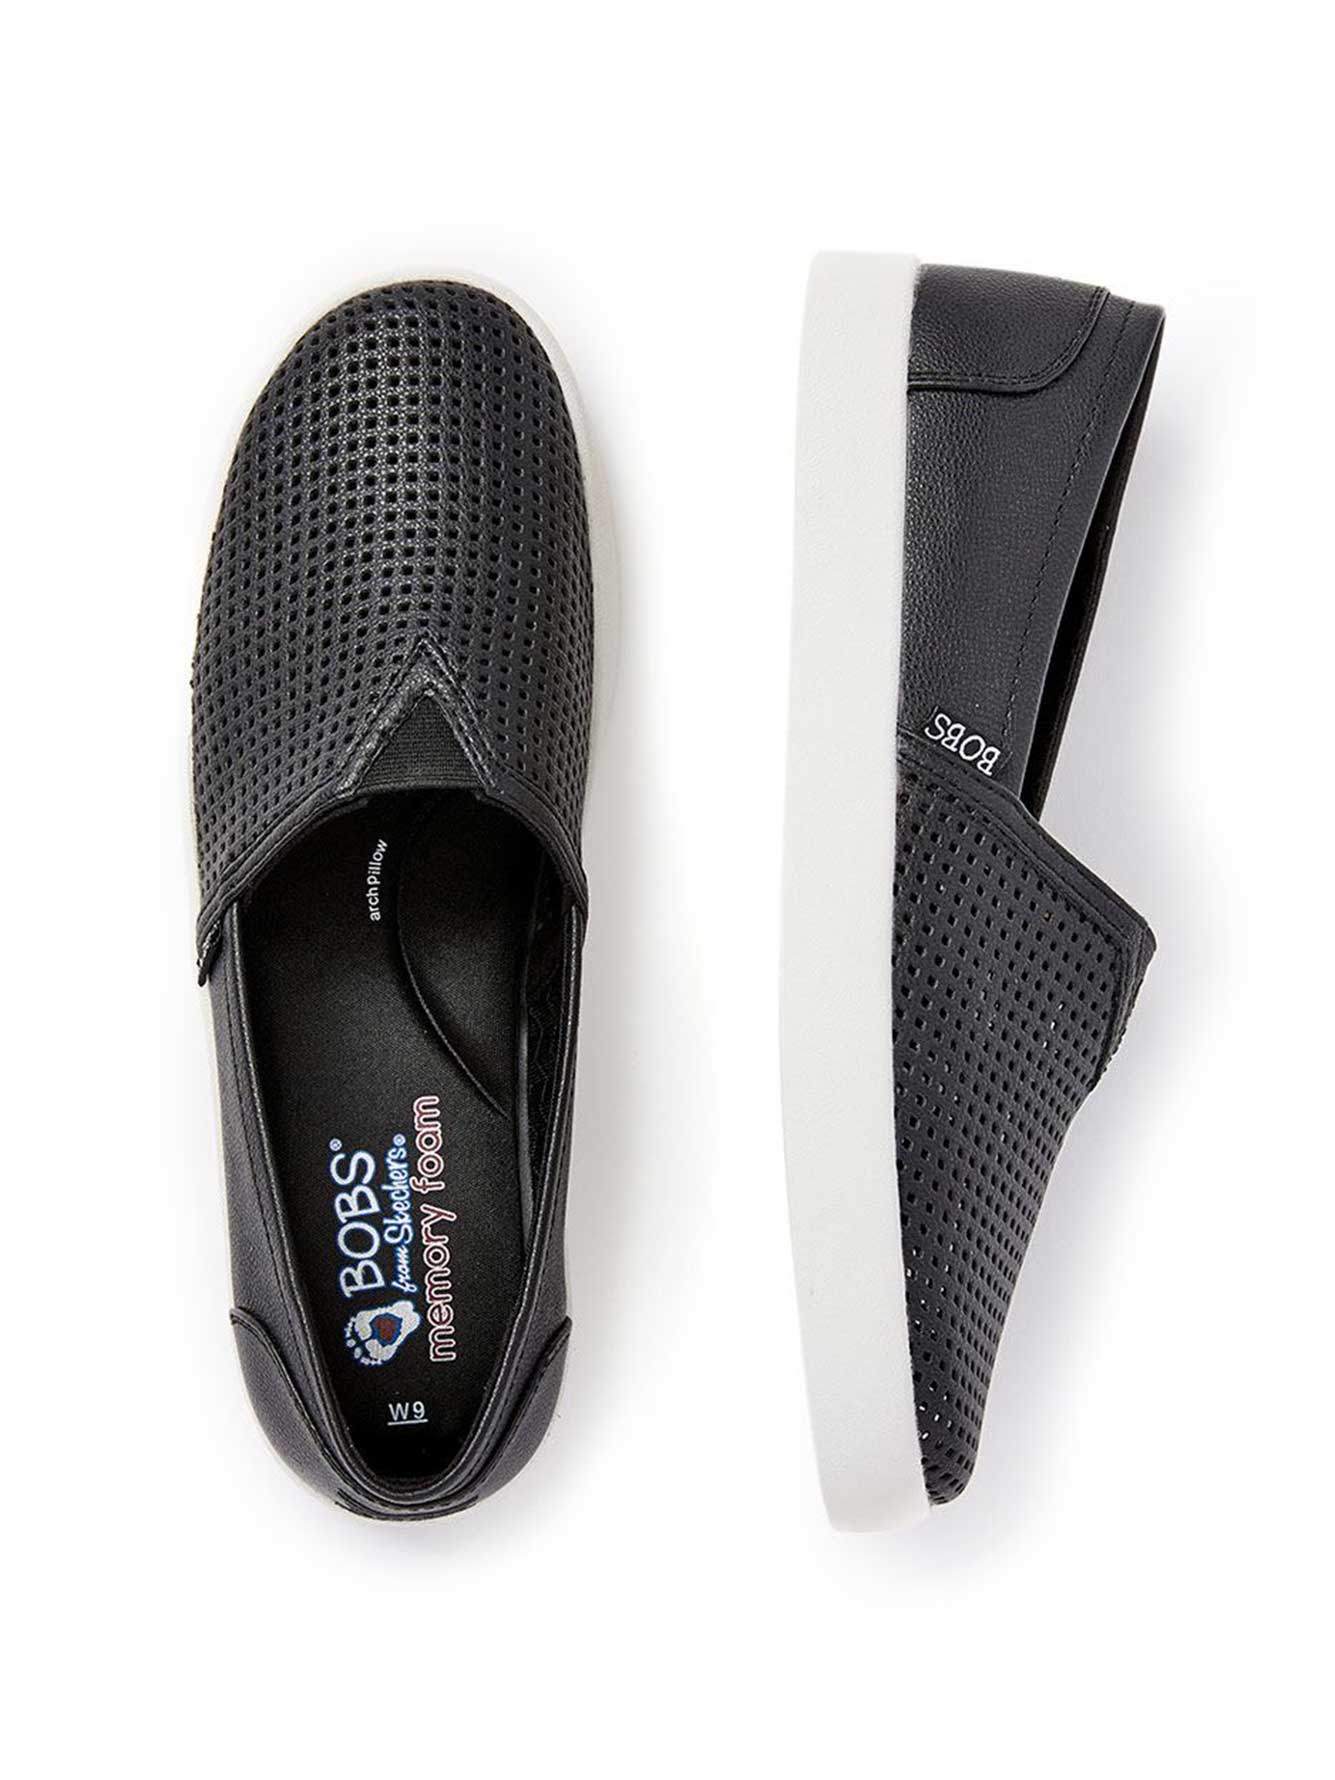 Wide-Width Perforated Slip On Shoes - BOBS from Skechers | Penningtons